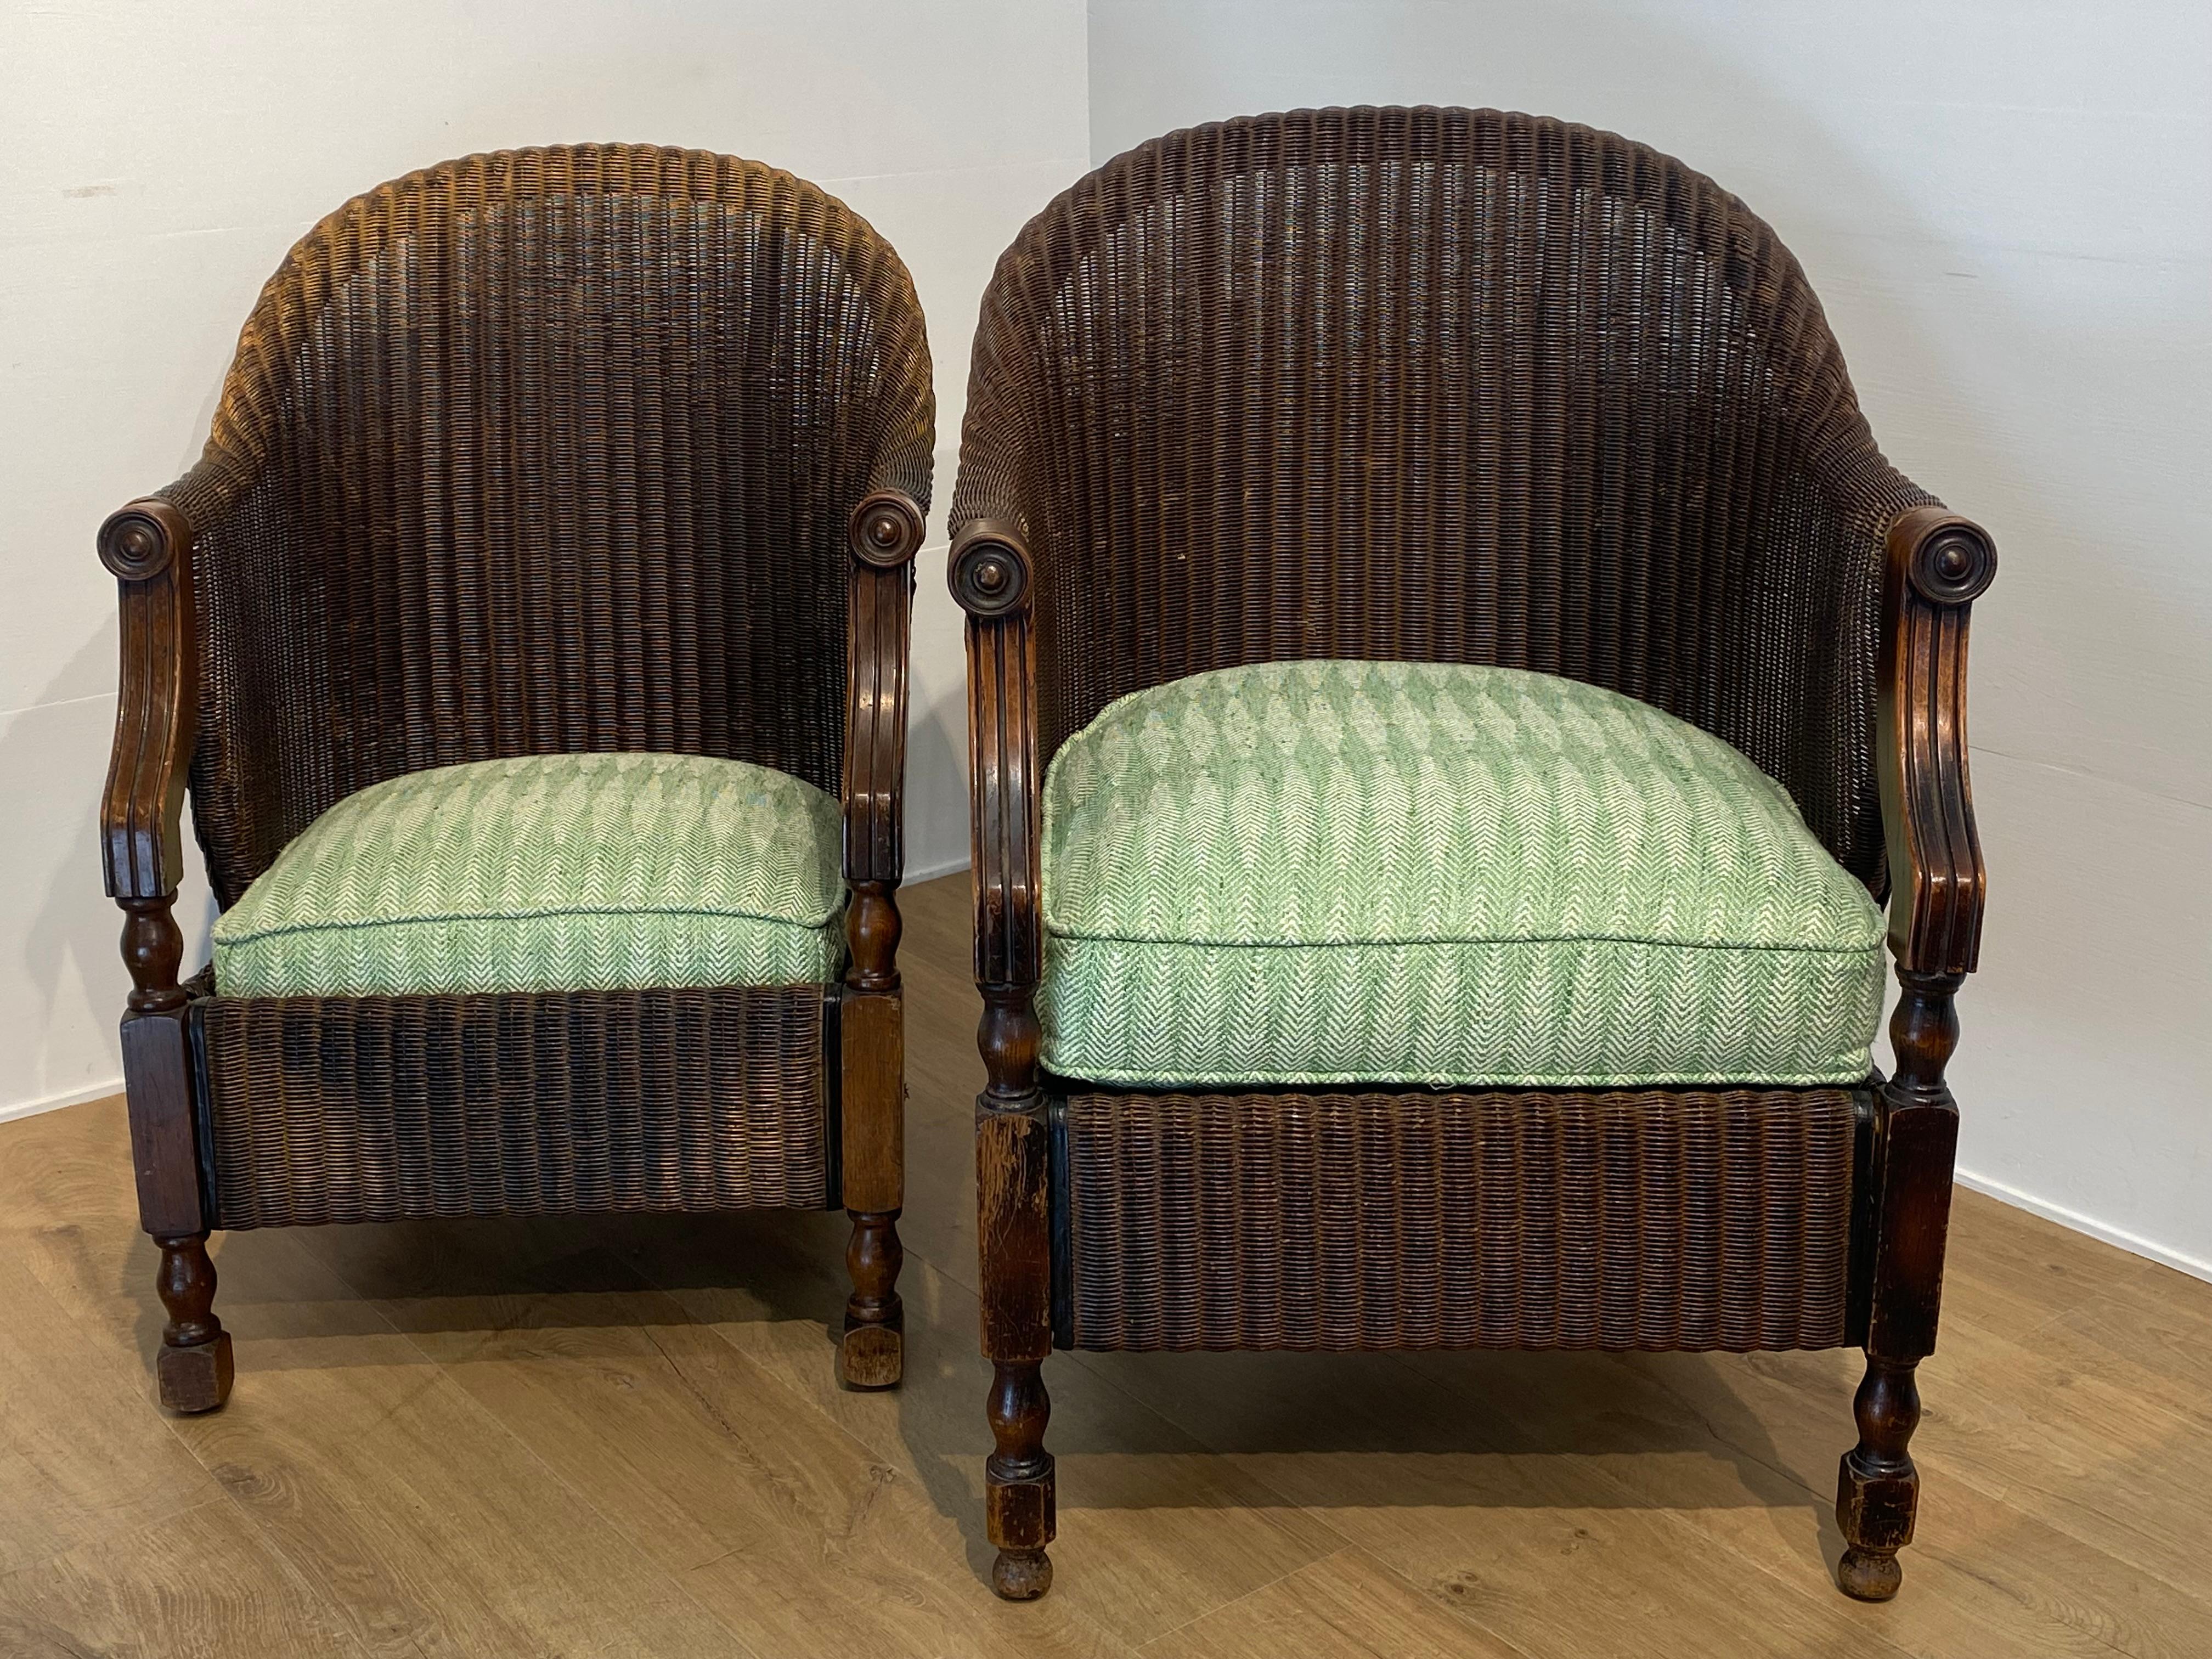 Pair of antique Loyd Loom Chairs In Rattan For Sale 11